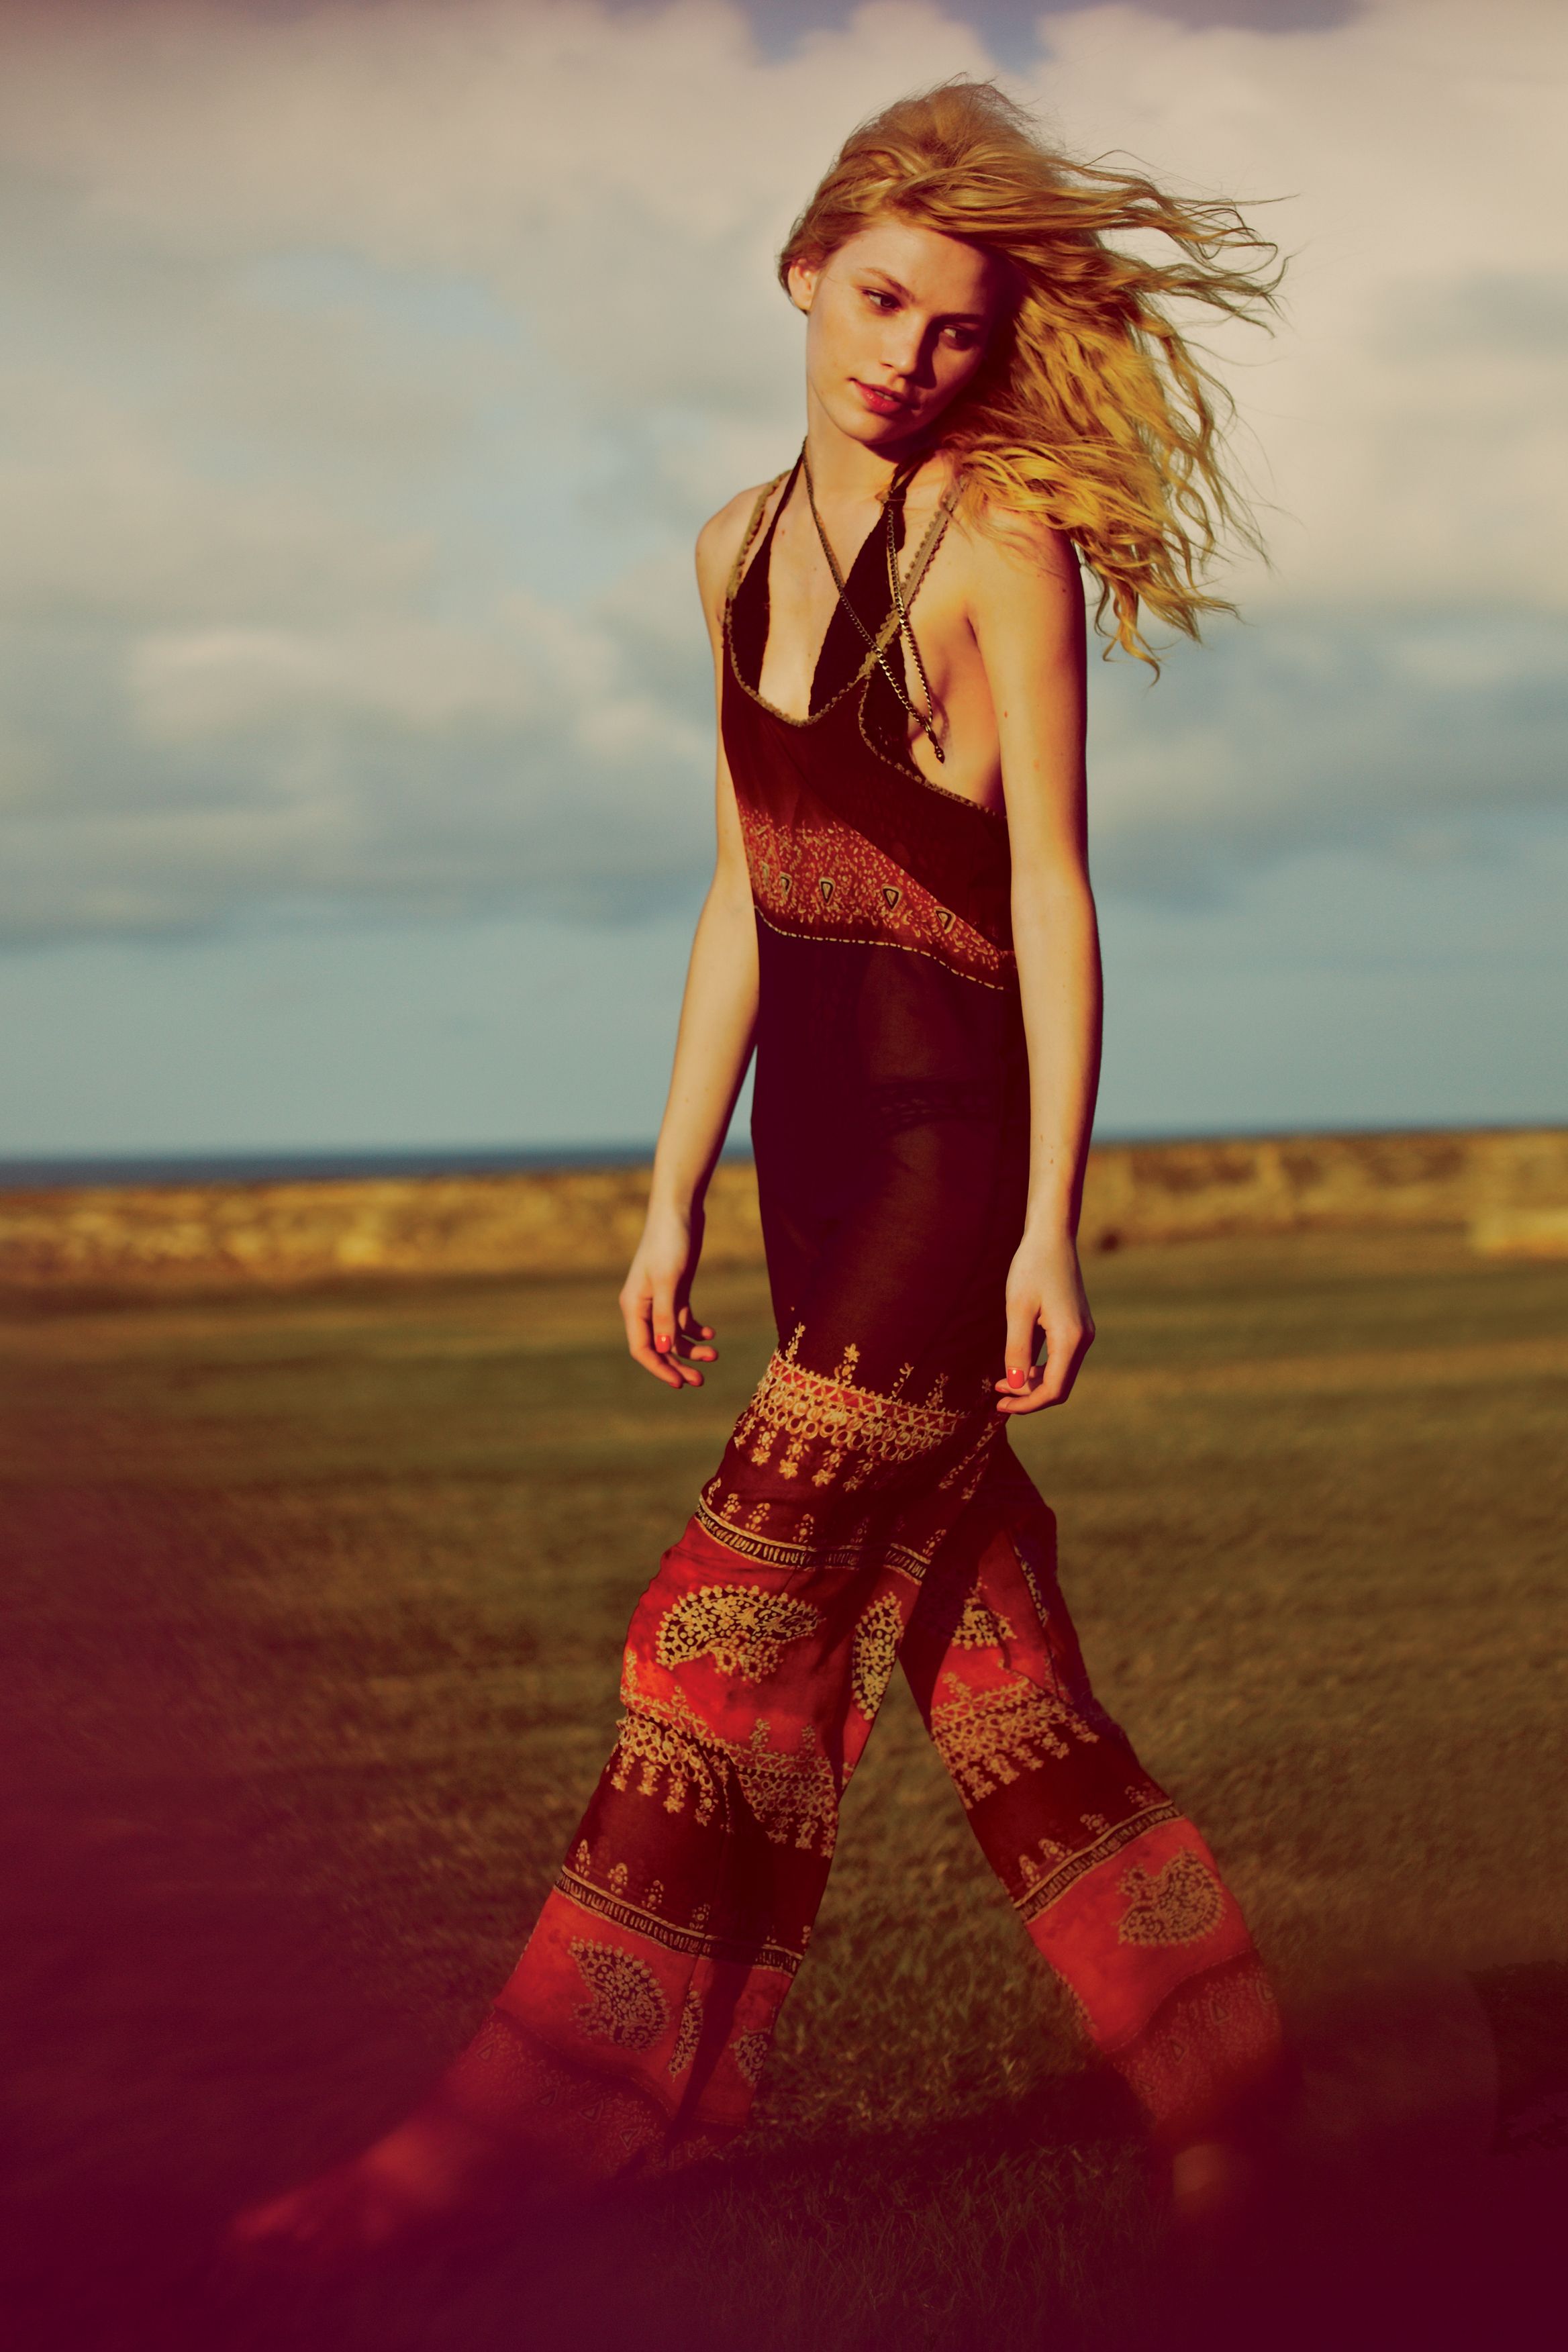 Free People March 2011 Catalog 10